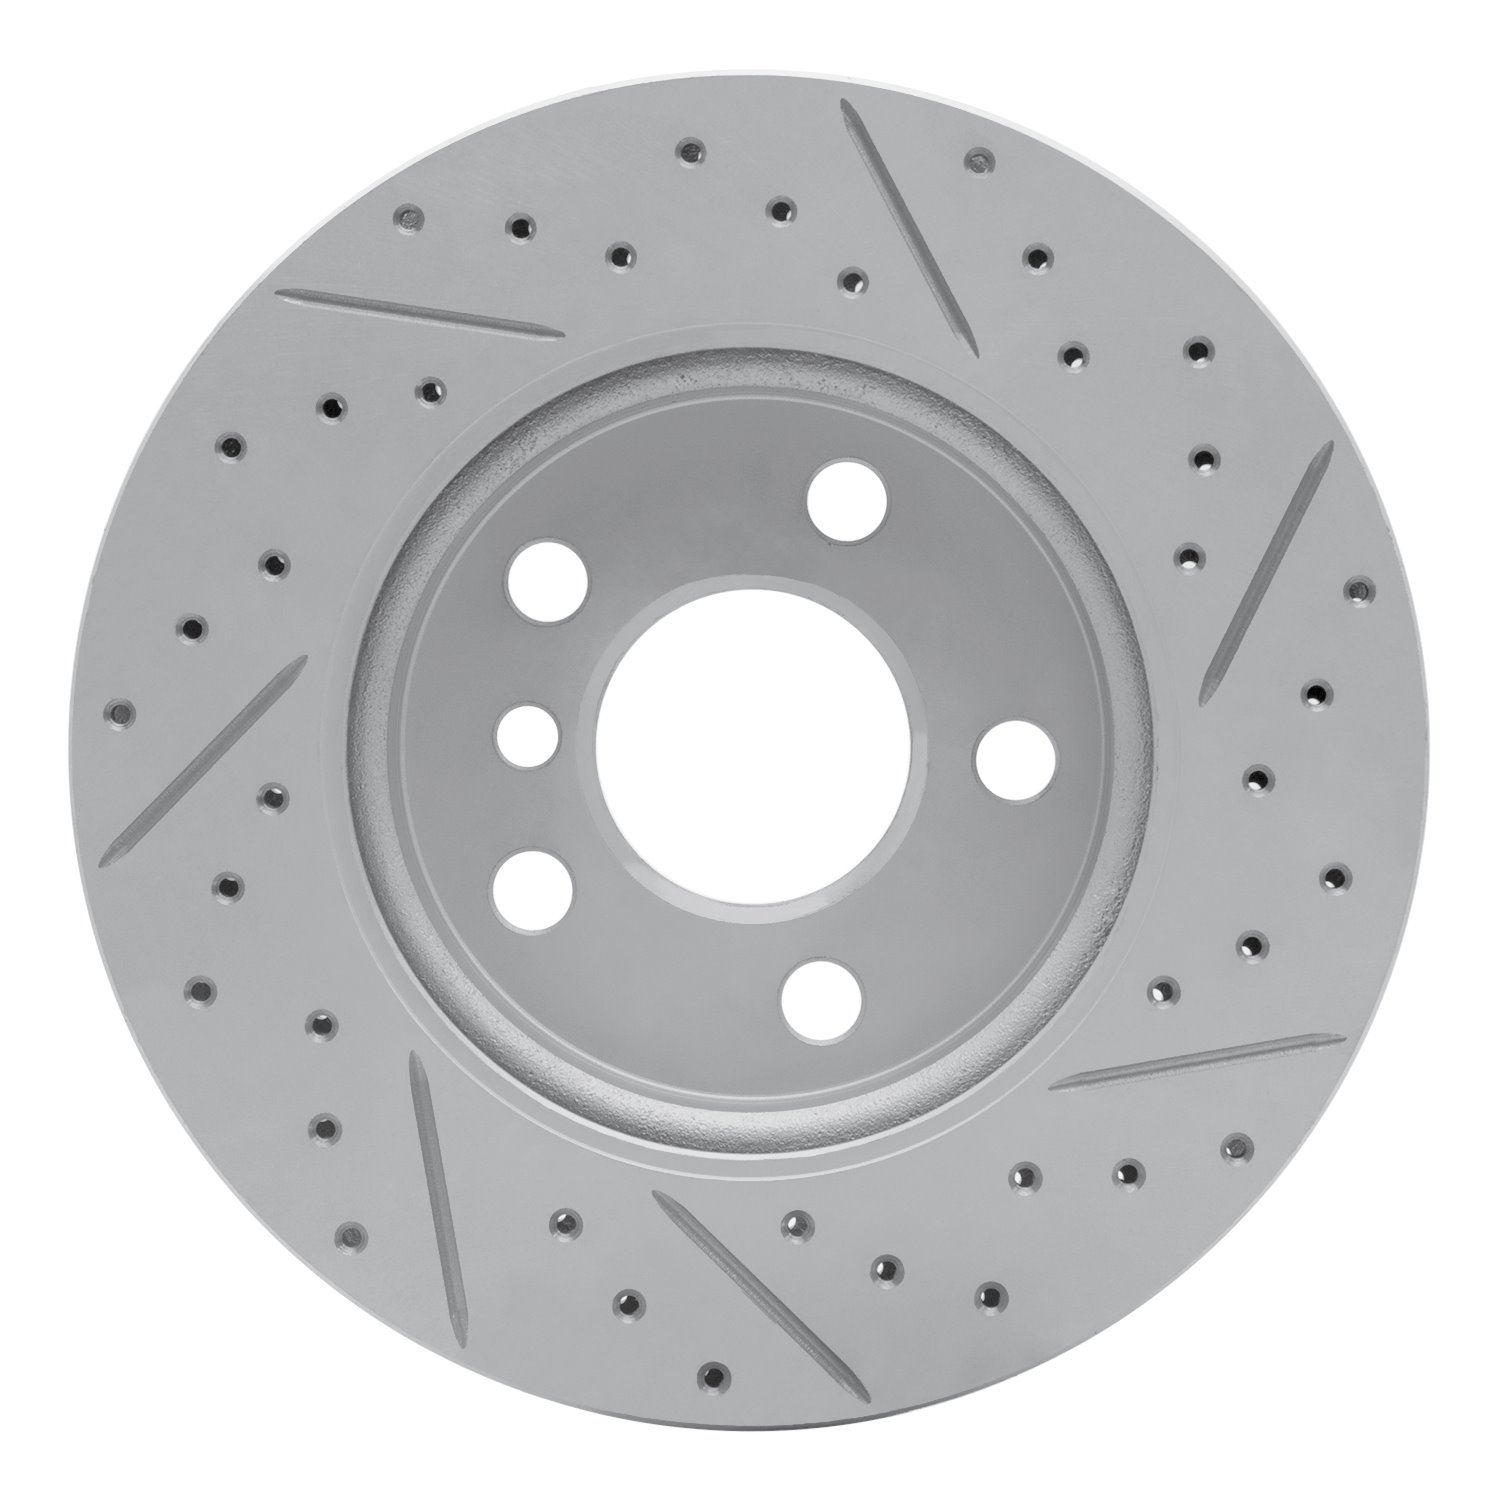 830-32017L Geoperformance Drilled/Slotted Brake Rotor, Fits Select Mini, Position: Front Left